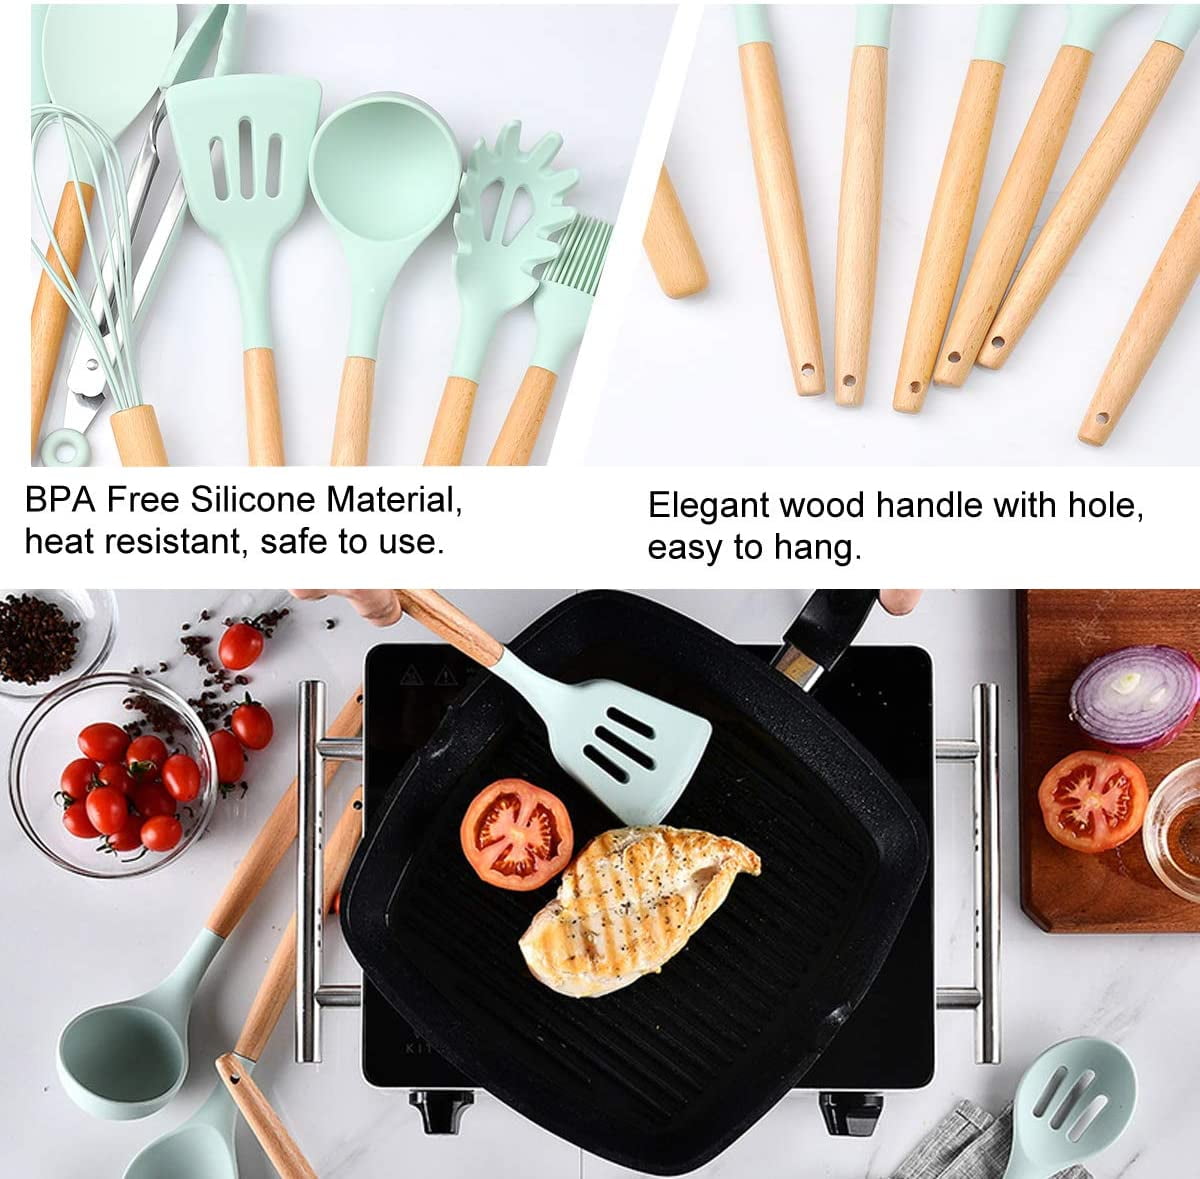 Kitchen Utensils Set- 13 Pcs Cooking Utensils with Tongs, Spoon Spatula  &Turner Made of Heat Resista…See more Kitchen Utensils Set- 13 Pcs Cooking